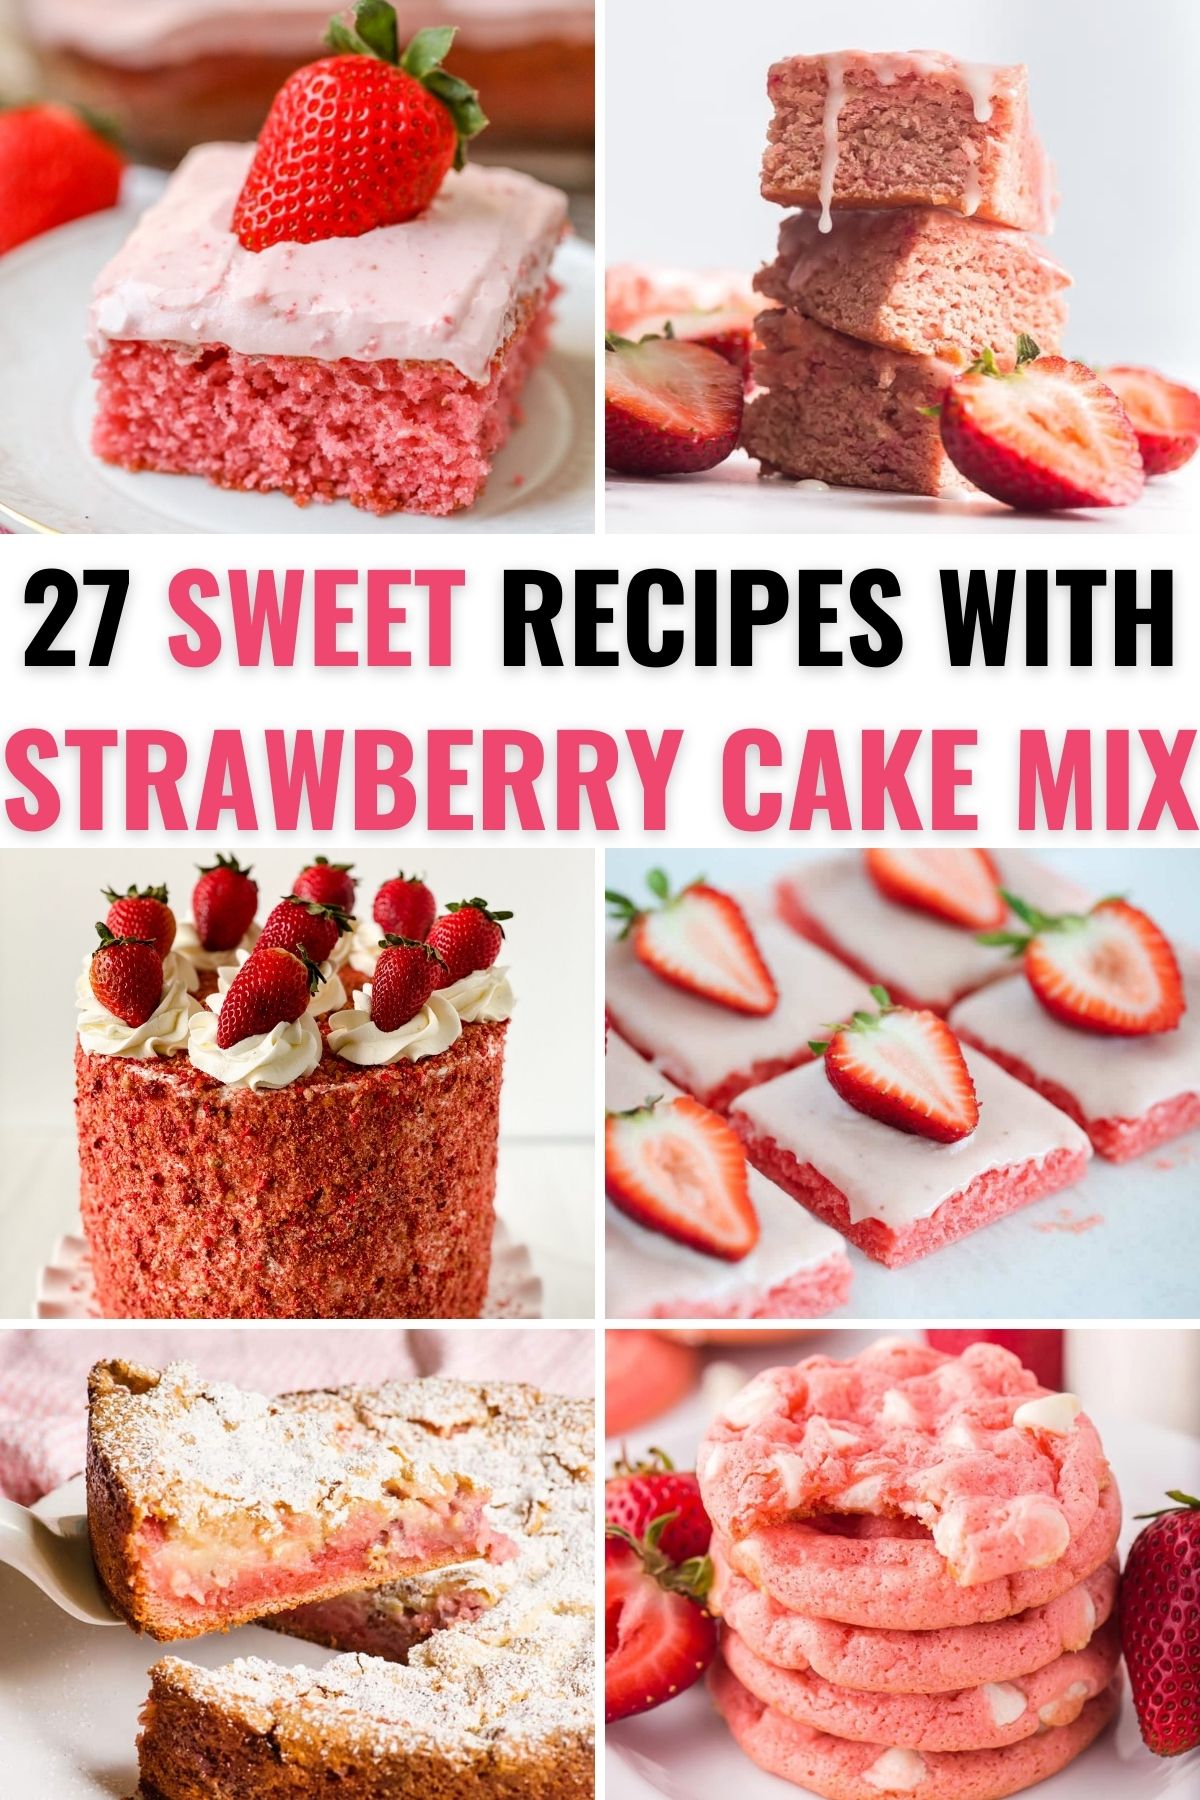 6 images of desserts made with strawberry cake mix with text 27 Sweet Recipes With Strawberry Cake Mix.